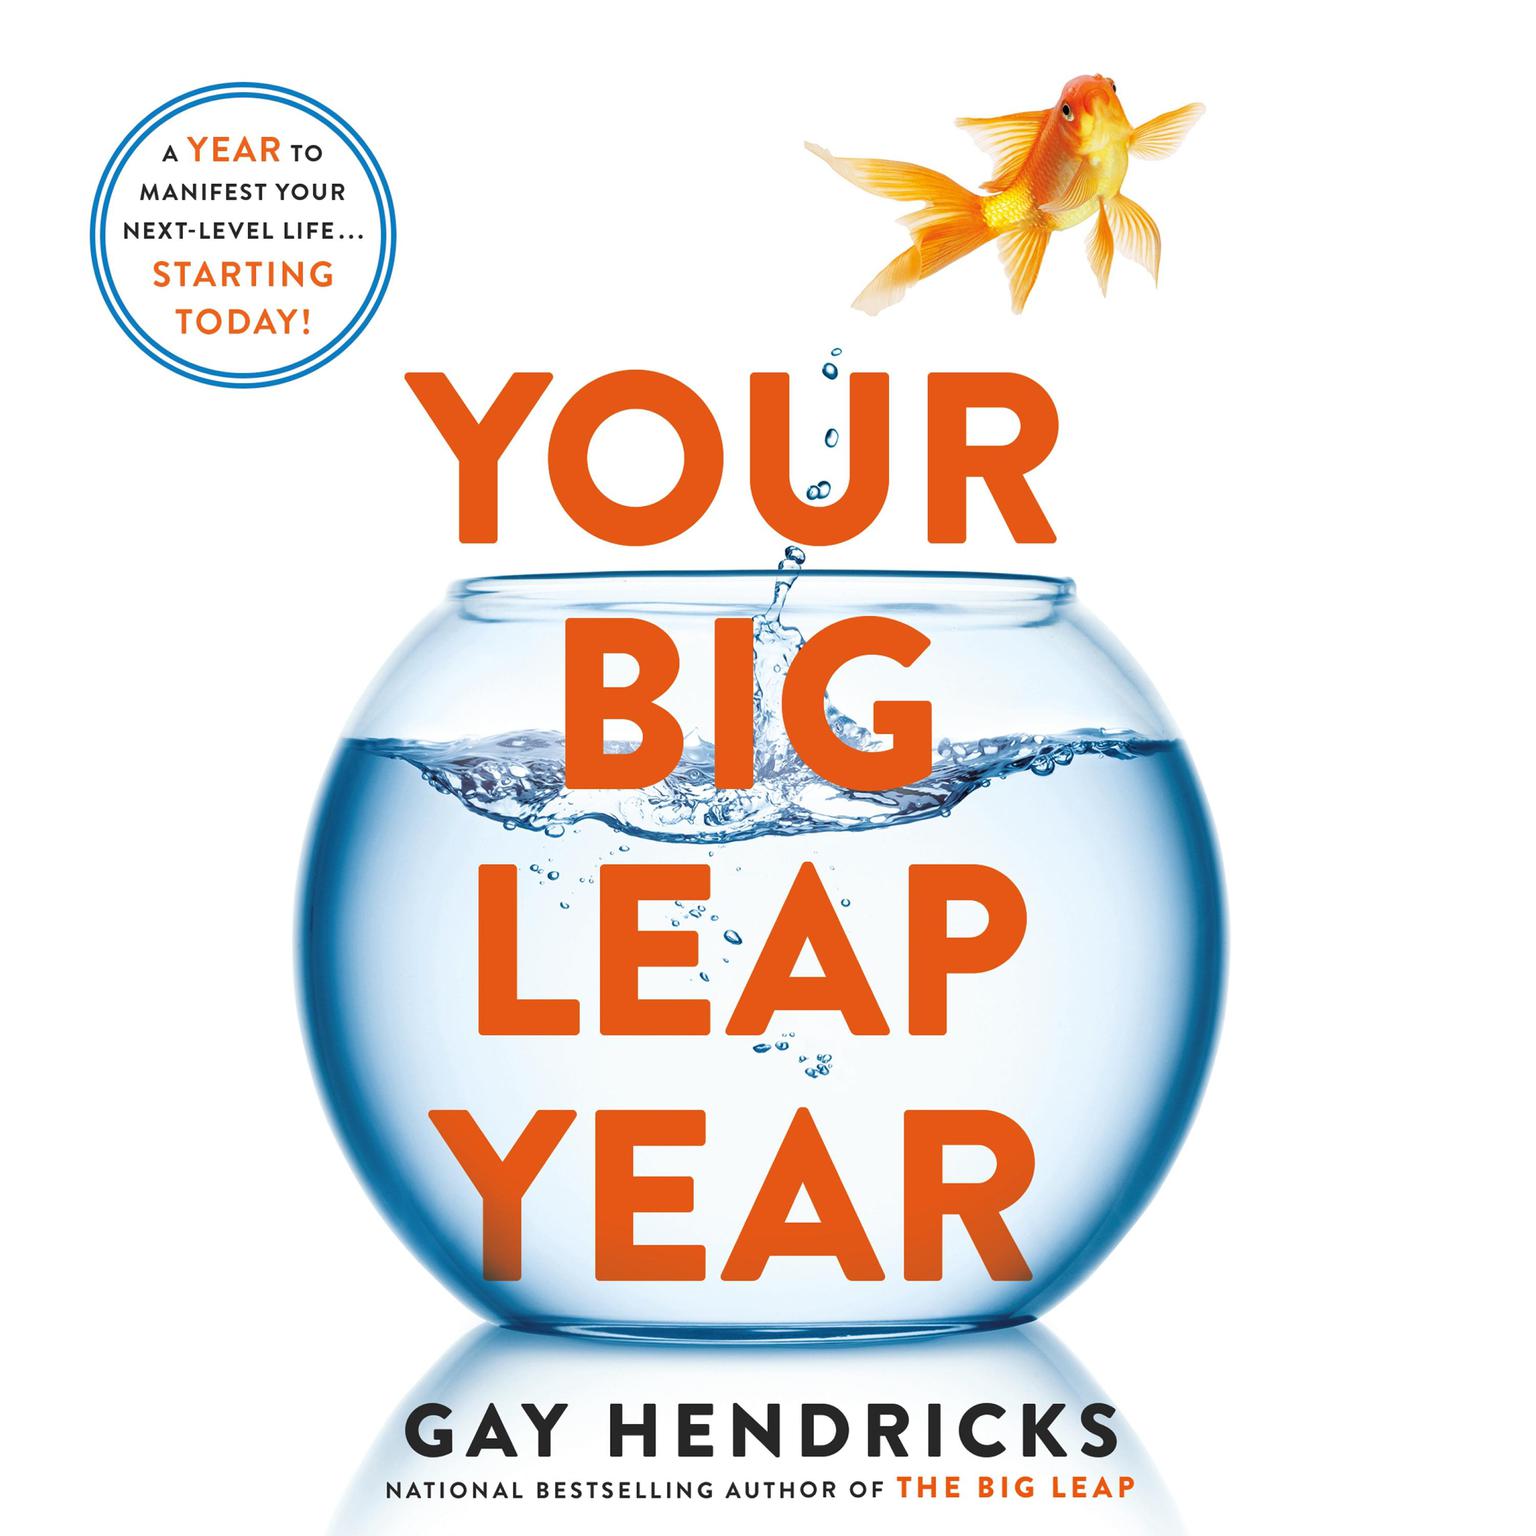 Your Big Leap Year: A Year to Manifest Your Next-Level Life...Starting Today! Audiobook, by Gay Hendricks